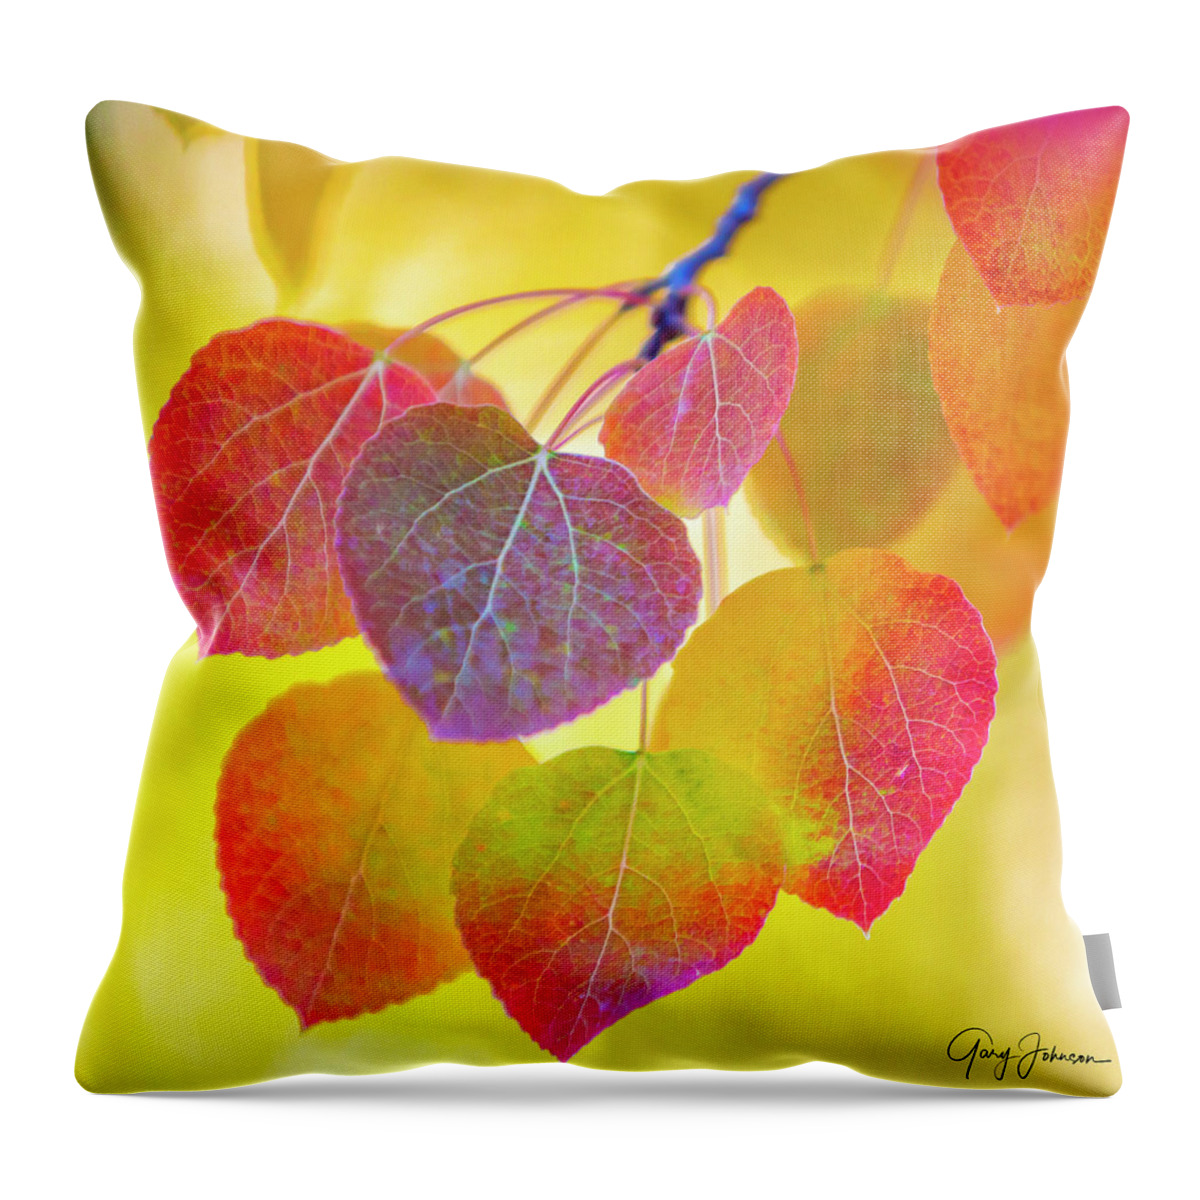 Aspen-trees Throw Pillow featuring the photograph Glowing Aspen by Gary Johnson